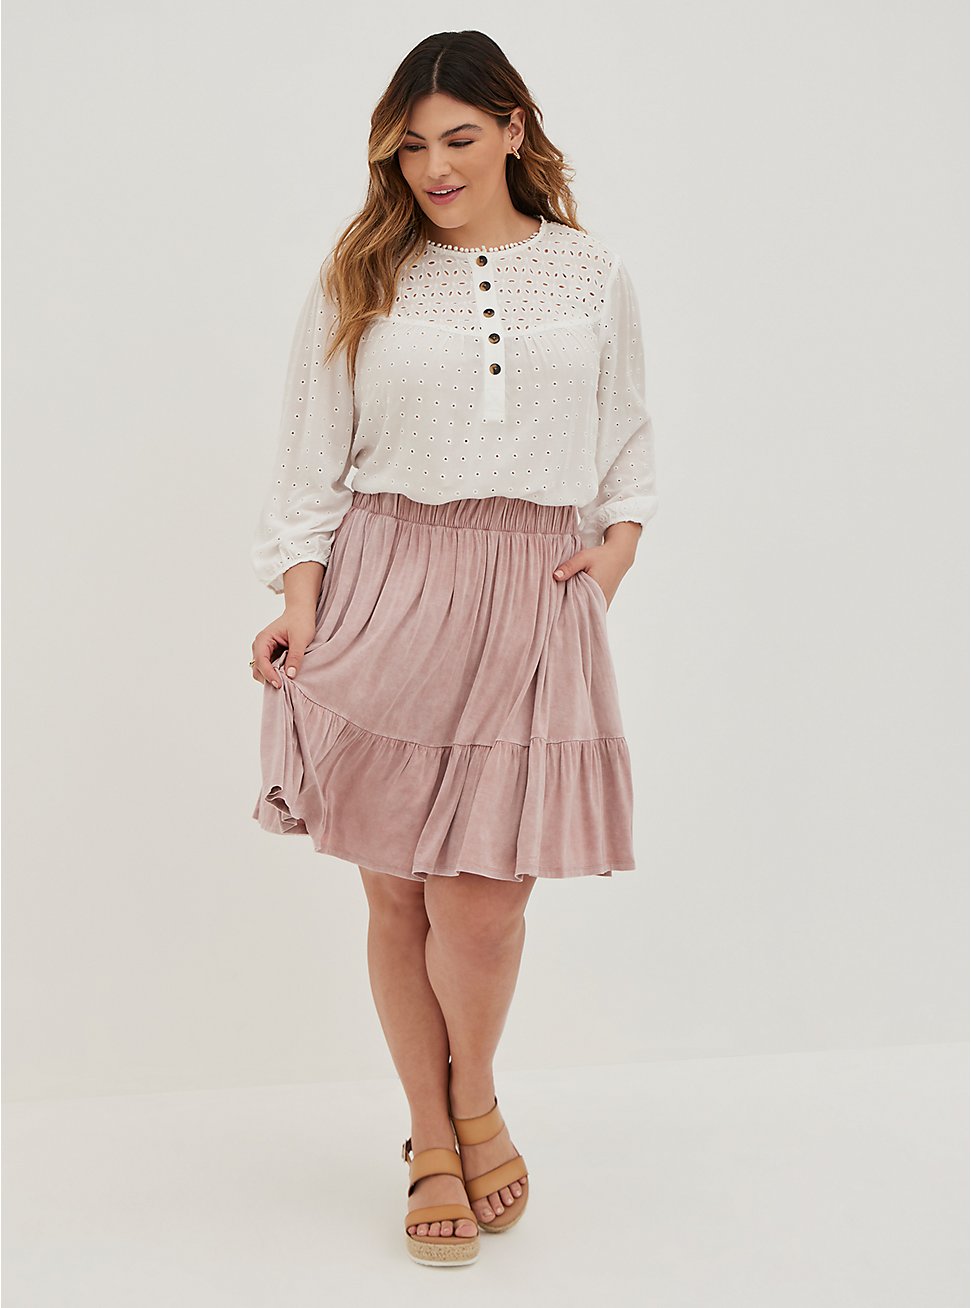 Plus Size Tiered Circle Skirt - Super Soft Pink Wash, LILAC, hi-res